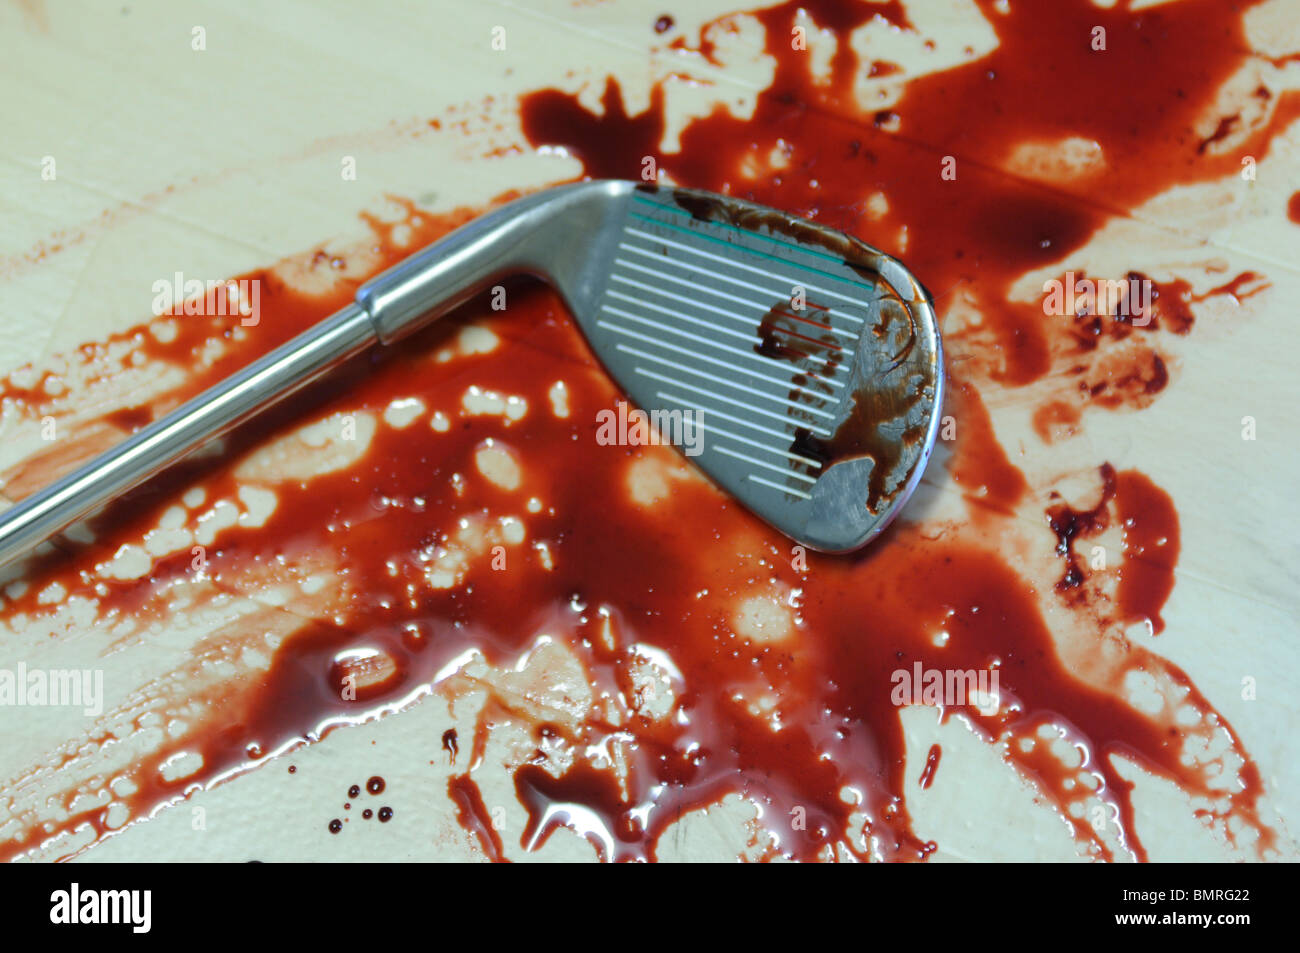 Golf Club Murder weapon, crime scene featuring a golf club in a pool of blood Stock Photo